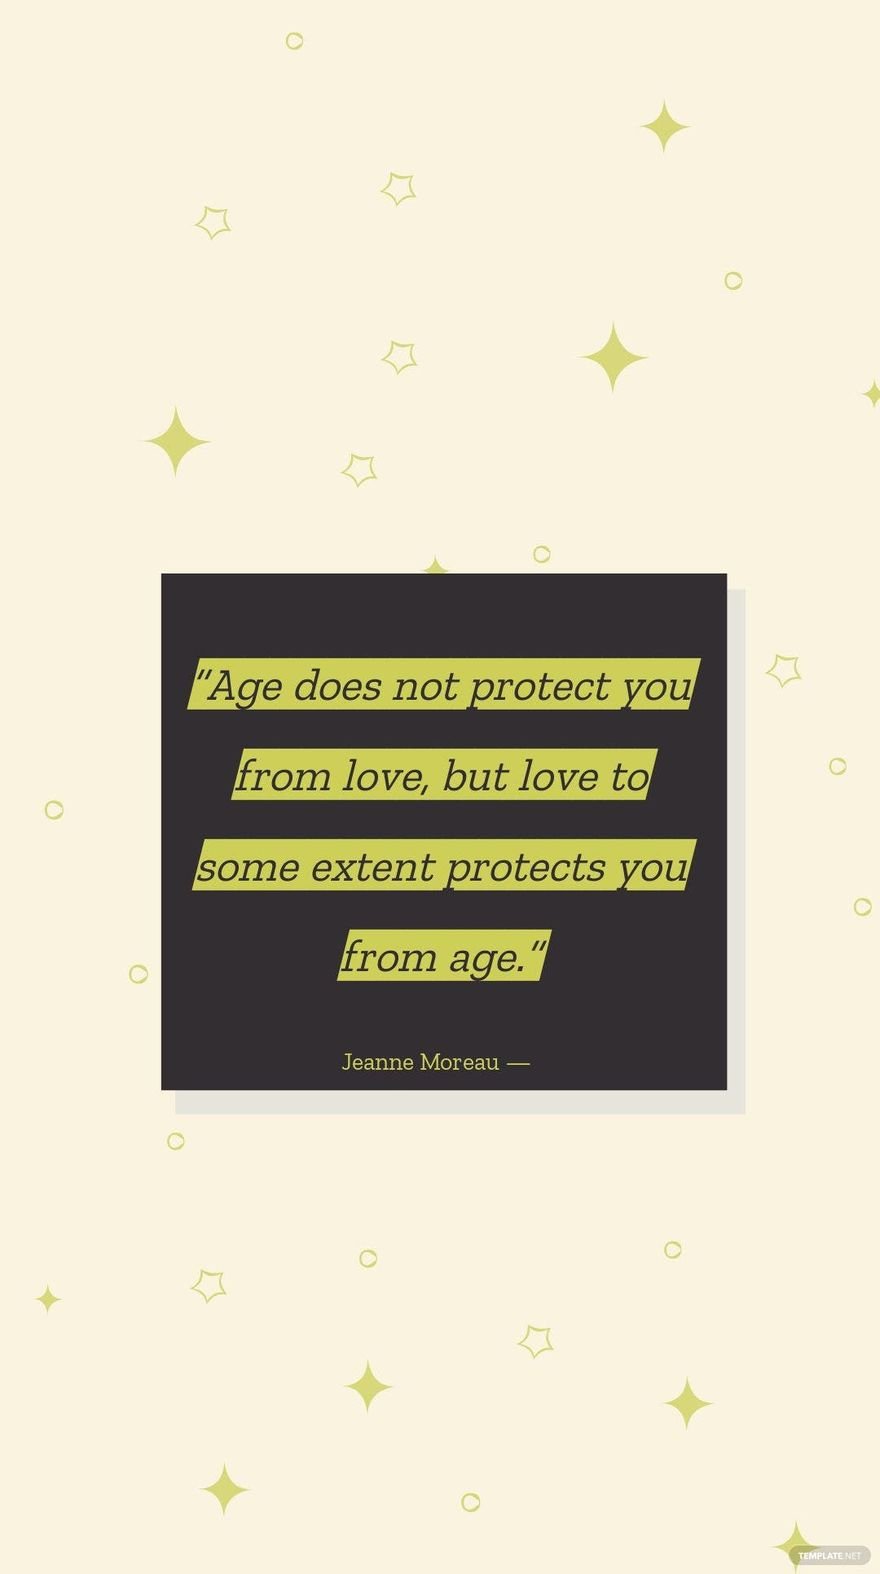 Jeanne Moreau — “Age does not protect you from love, but love to some extent protects you from age.”